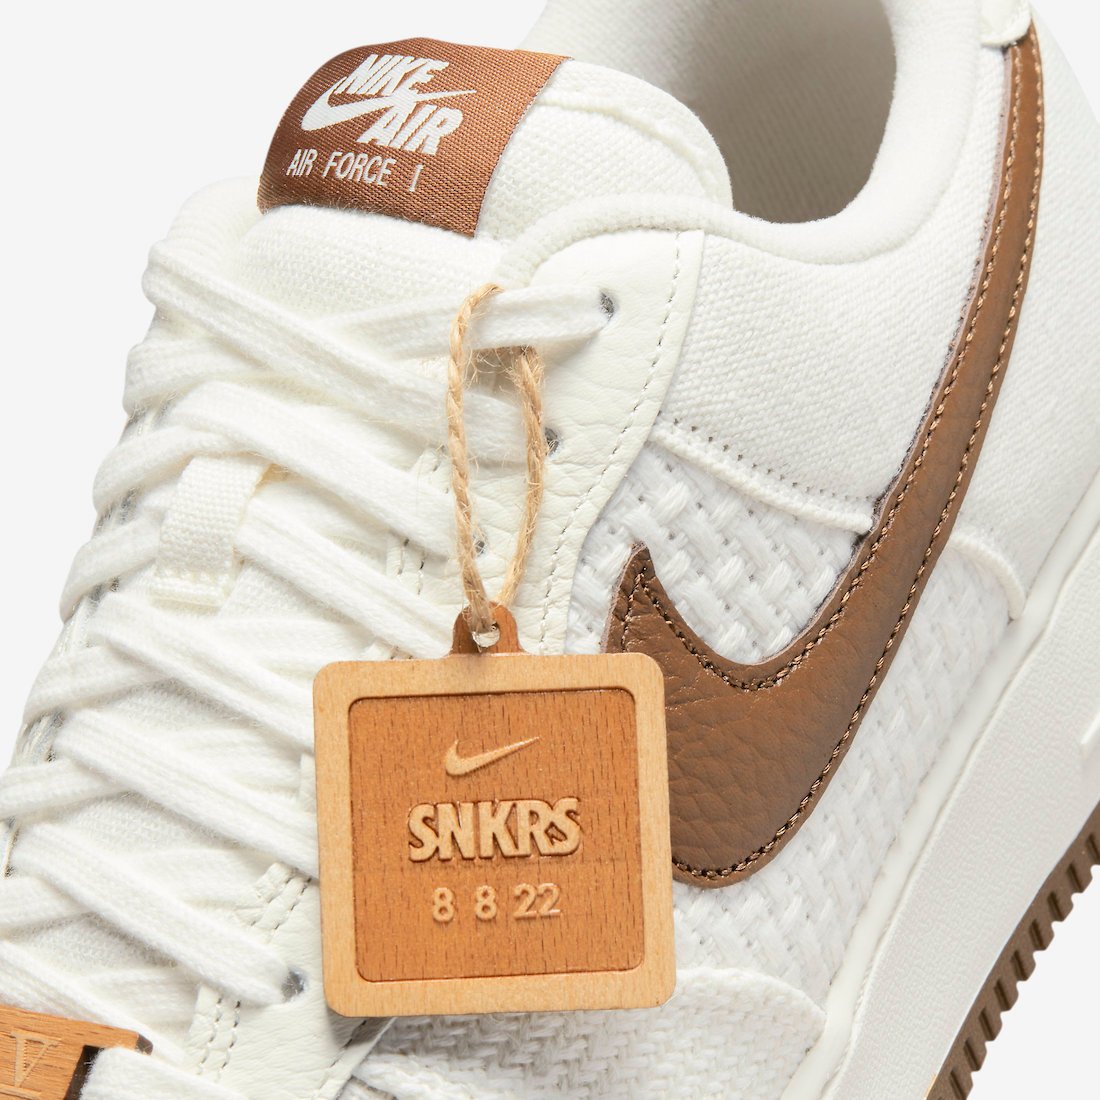 Nike Air Force 1 Low SNKRS Day Nike Air Force 1 Low SNKRS Day DX2666-100 Release Date Info